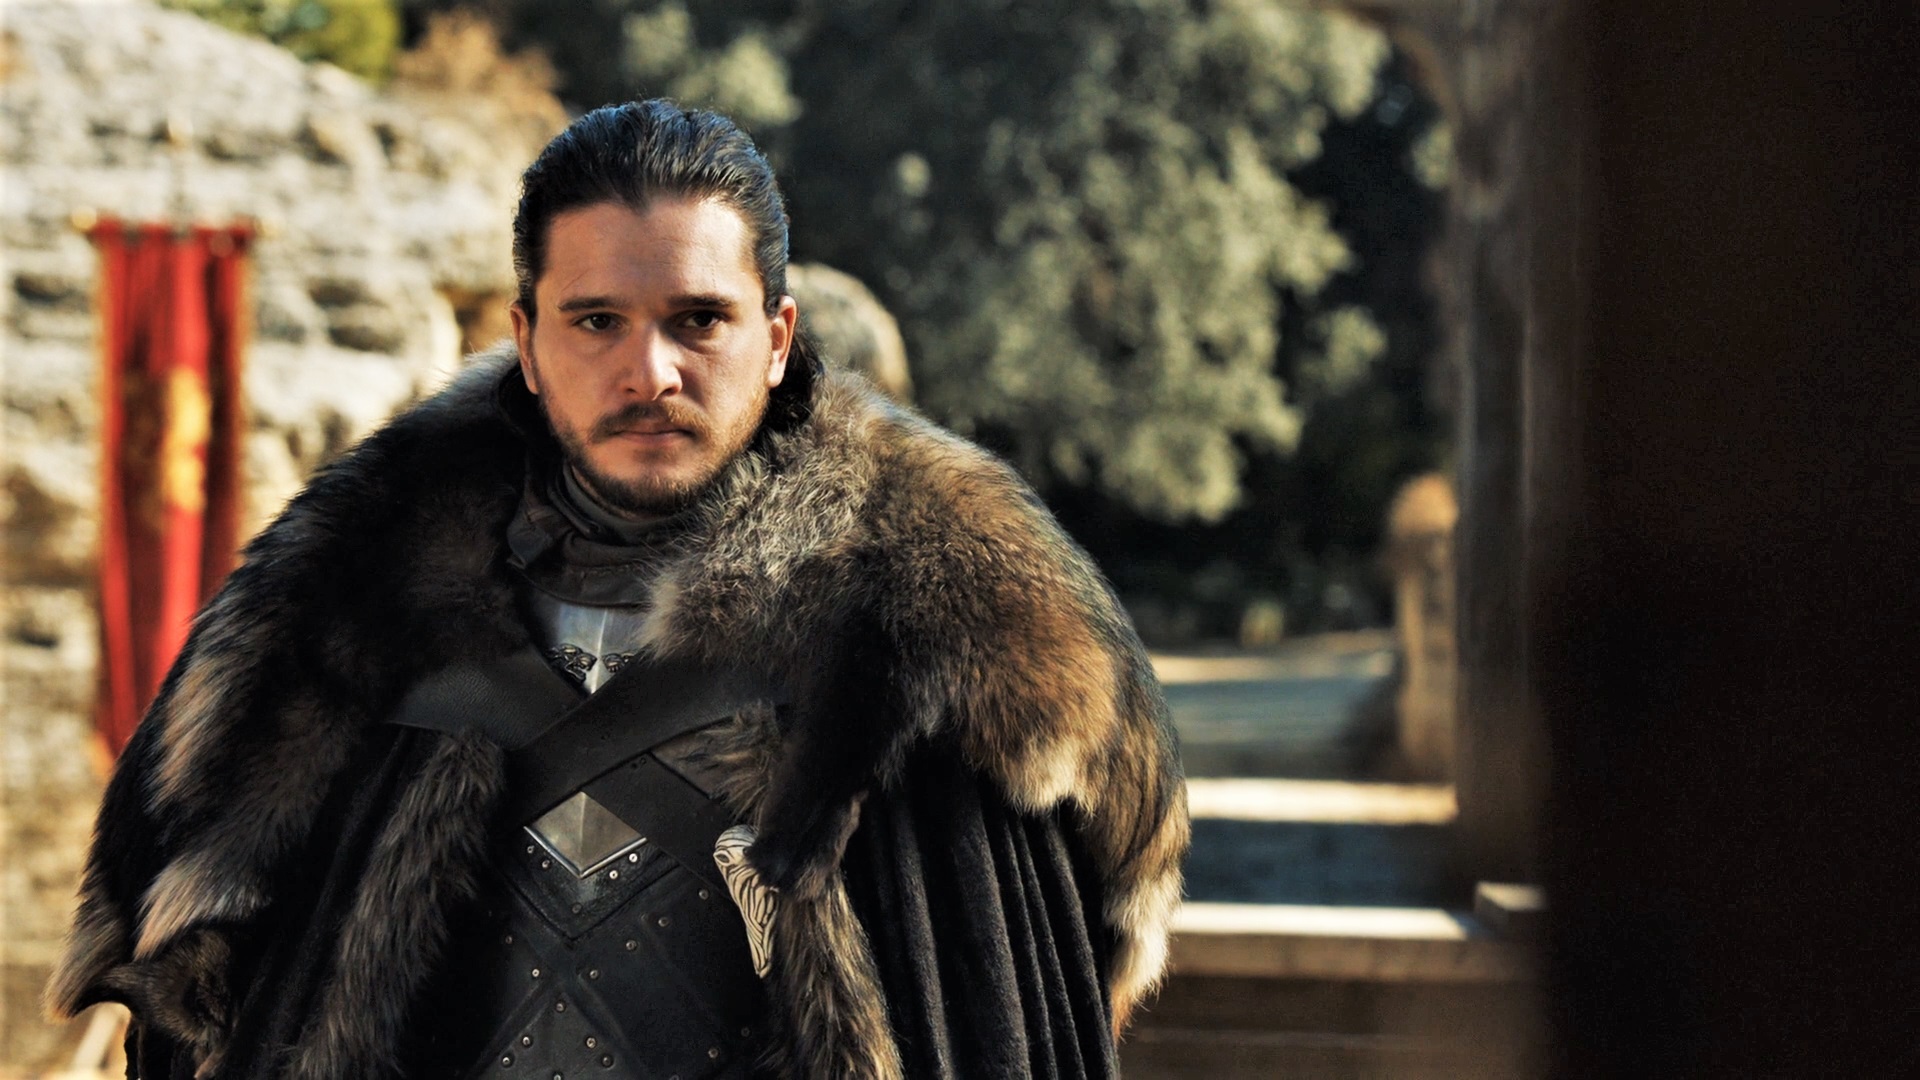 Jon Snow visited King's Landing and the Dragonpit for the first and last time in "The Dragon and the Wolf"